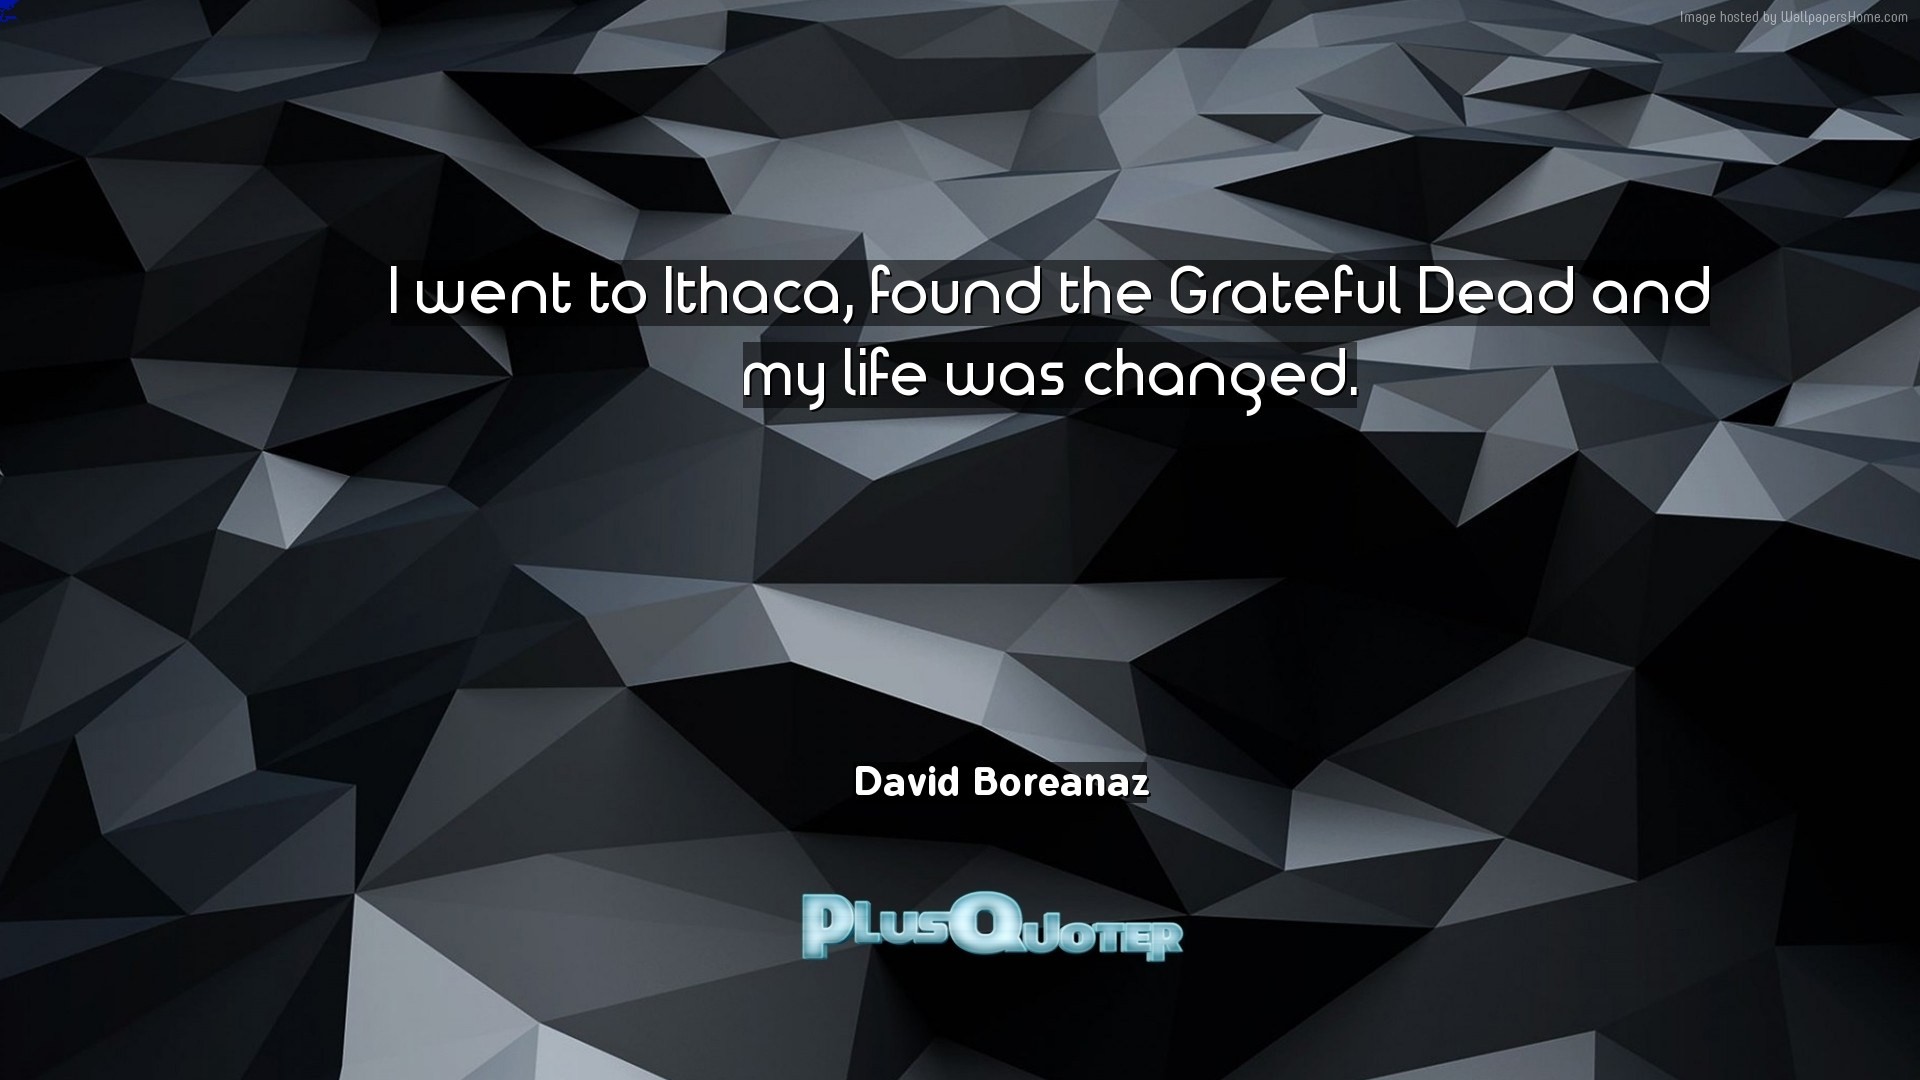 1920x1080 Download Wallpaper with inspirational Quotes- "I went to Ithaca, found the Grateful  Dead